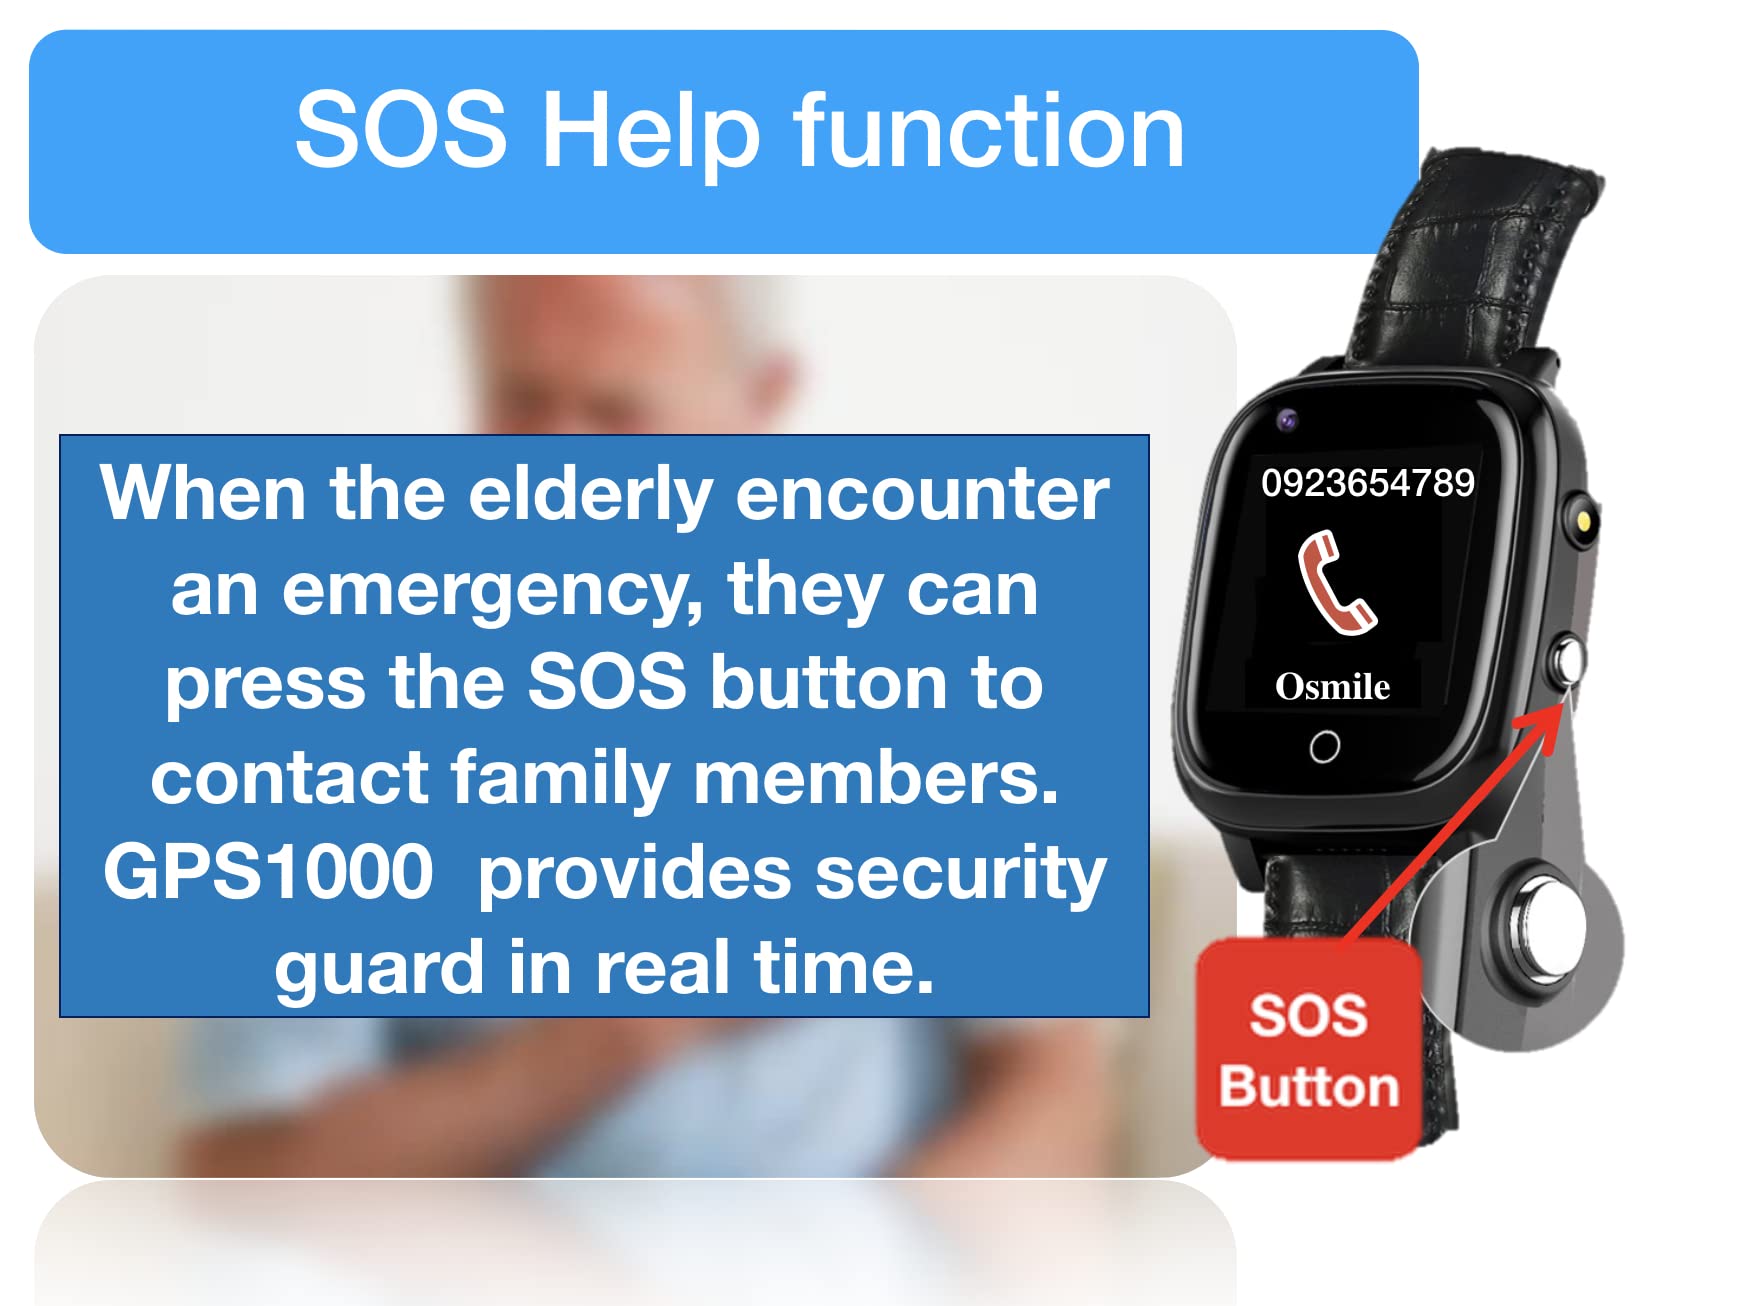 Osmile ED1000 GPS Tracker for Dementia Patients, Seniors Living Alone or with Other Disabilities (Anti-Lost GPS Watch for Elderly & Kids with Fall Alert, SOS Button, GPS Tracking, and Geofencing) (L)